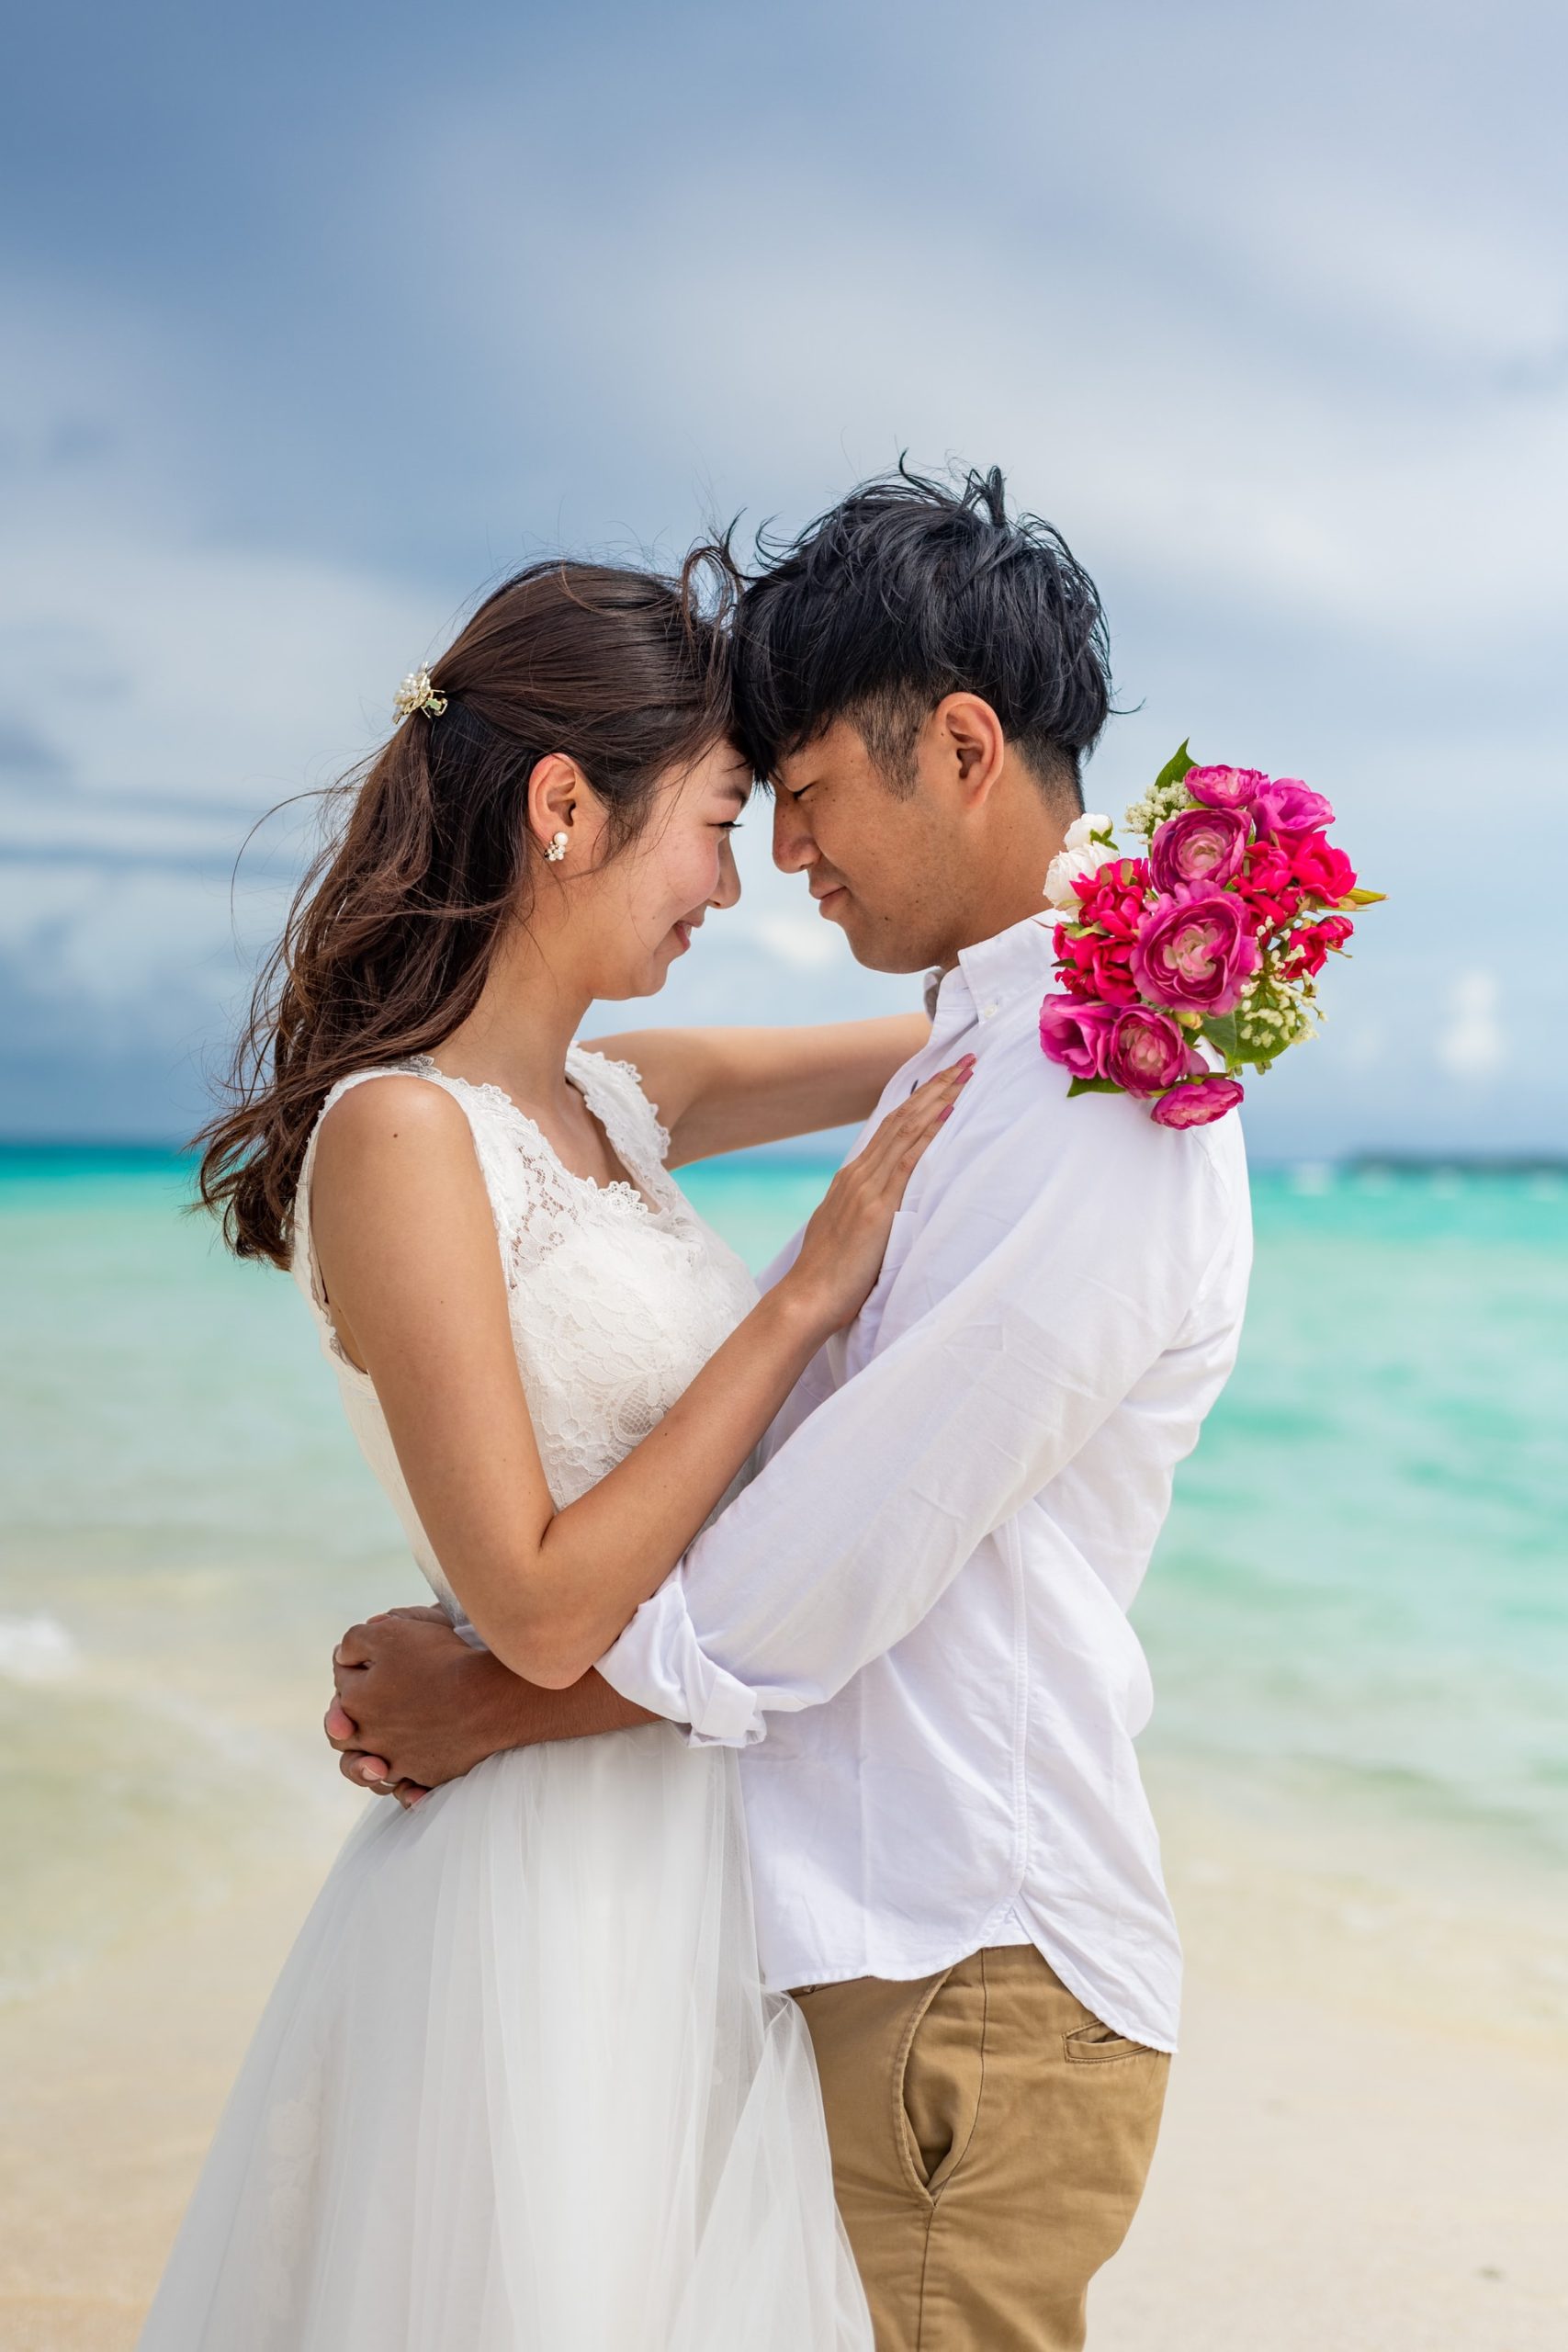 Bride and groom in a loving embrace on the beach.